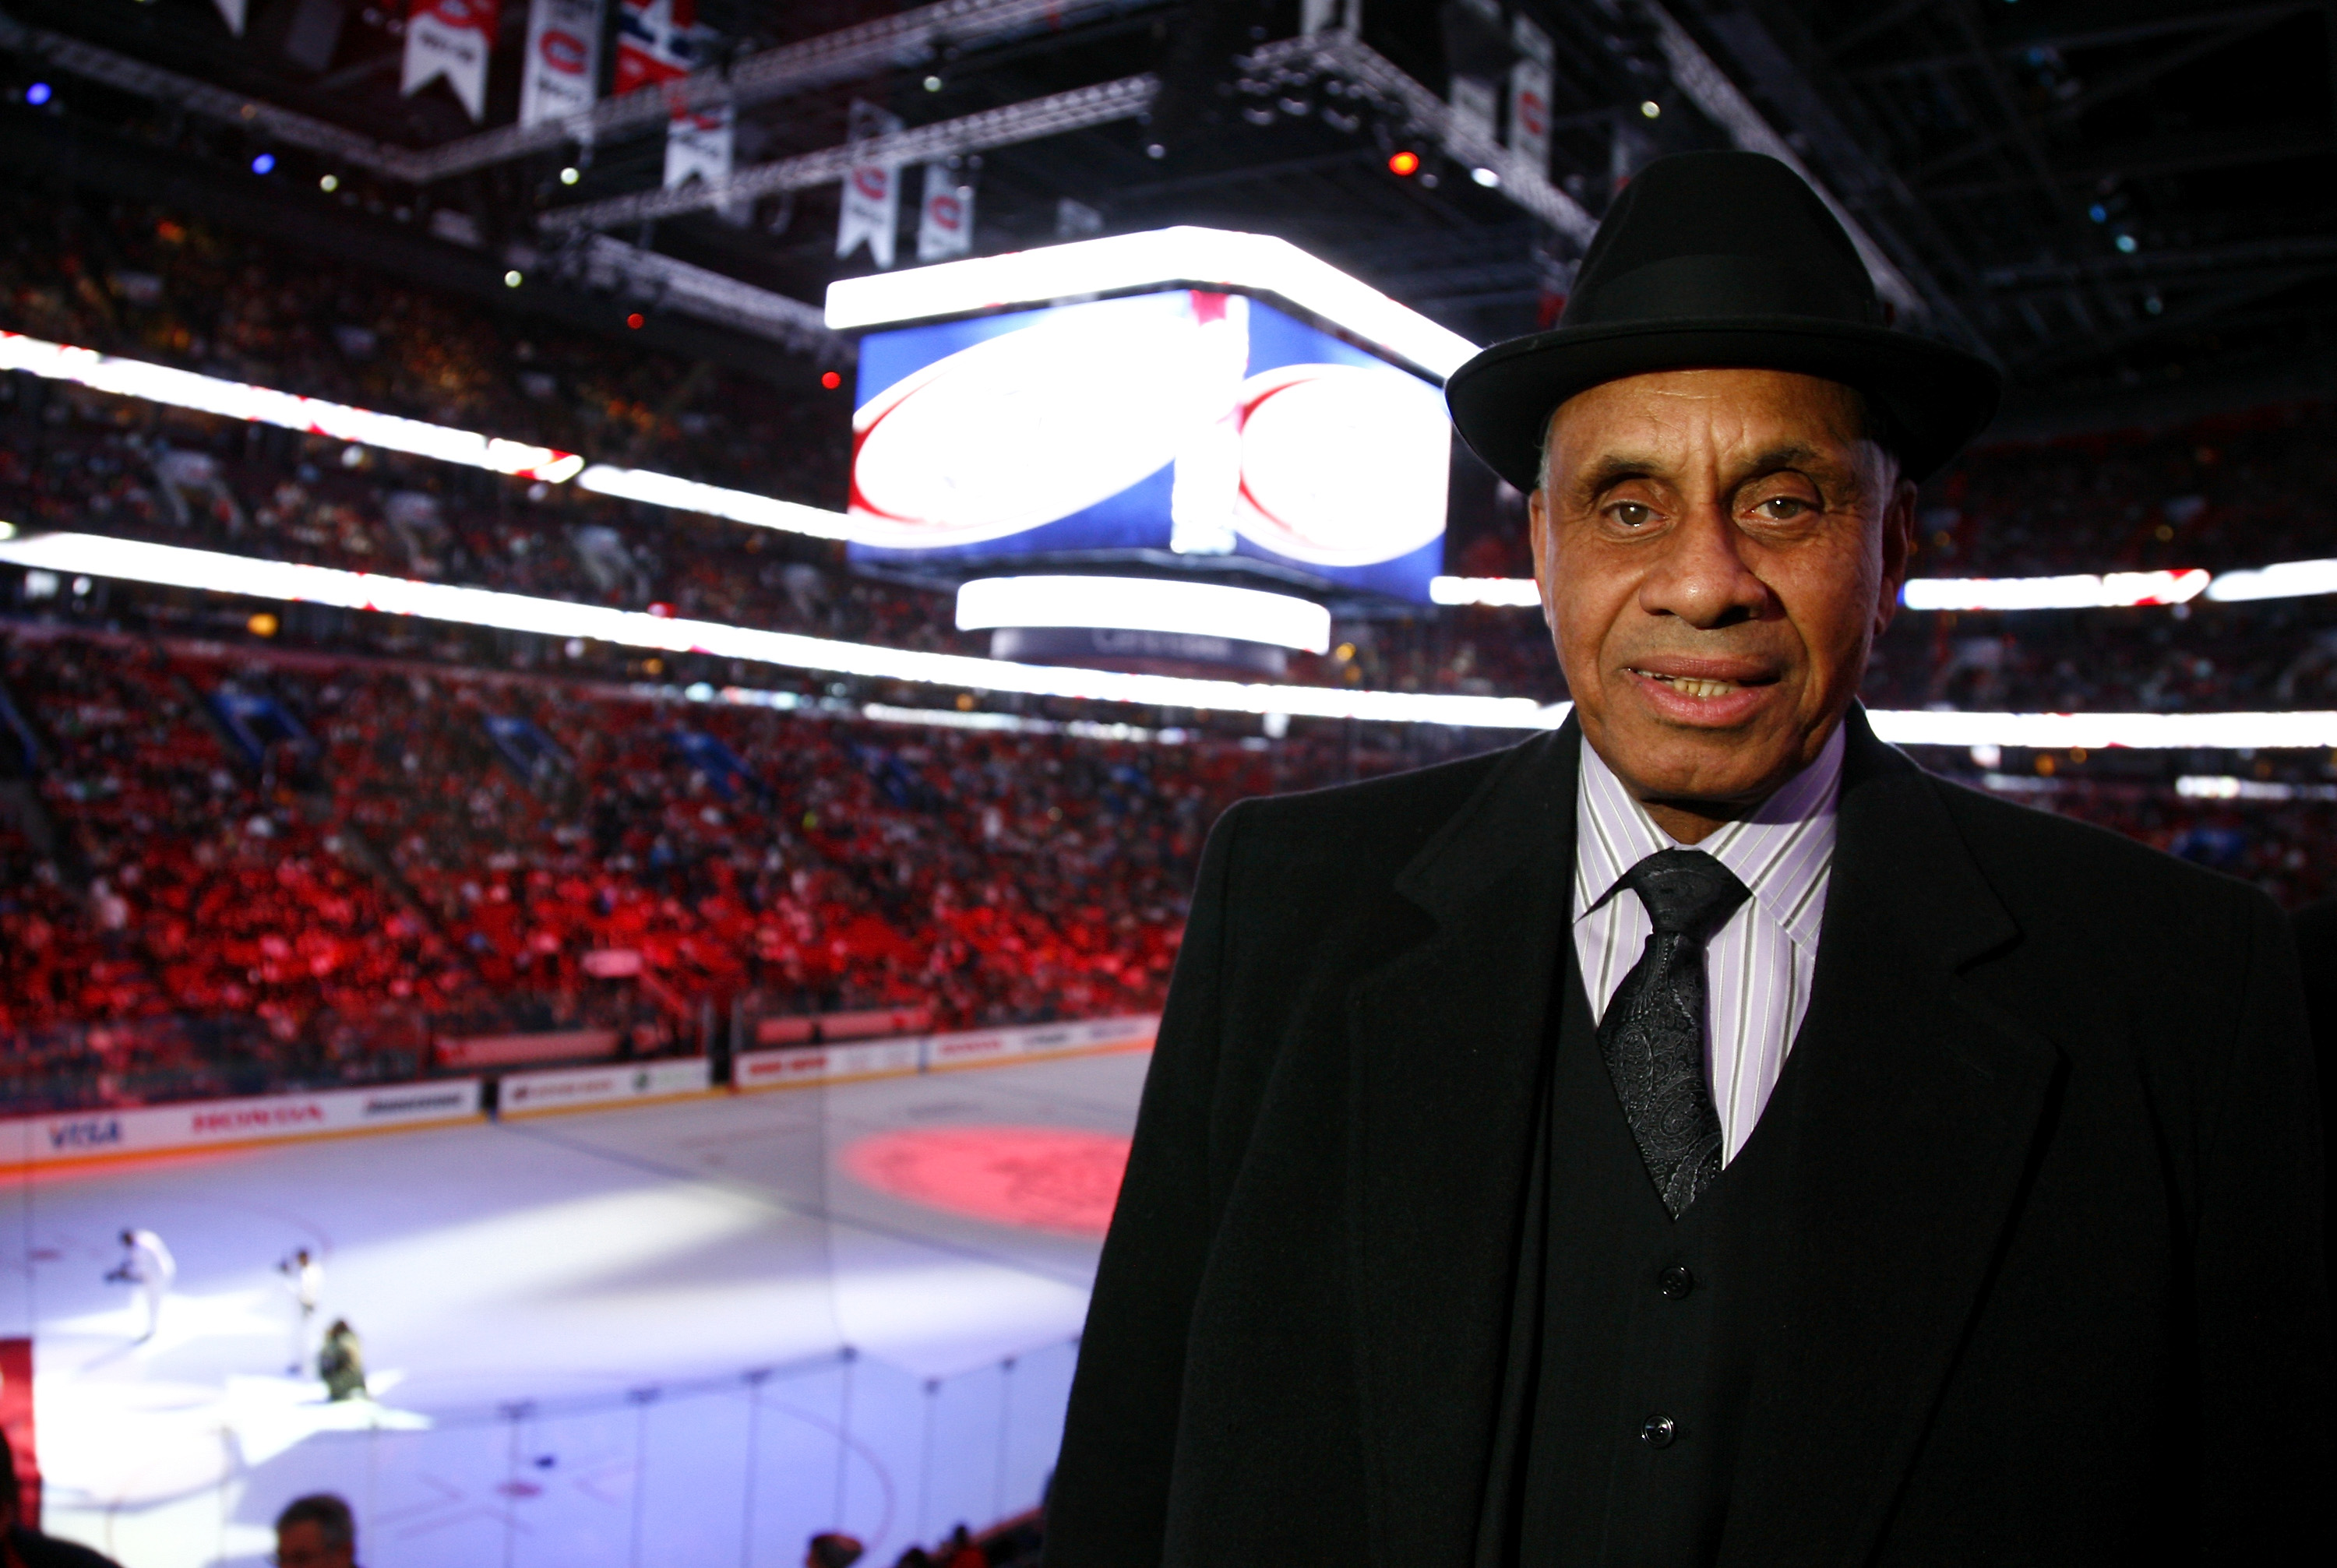 Willie O'Ree, his number soon to be retired by Bruins, continues